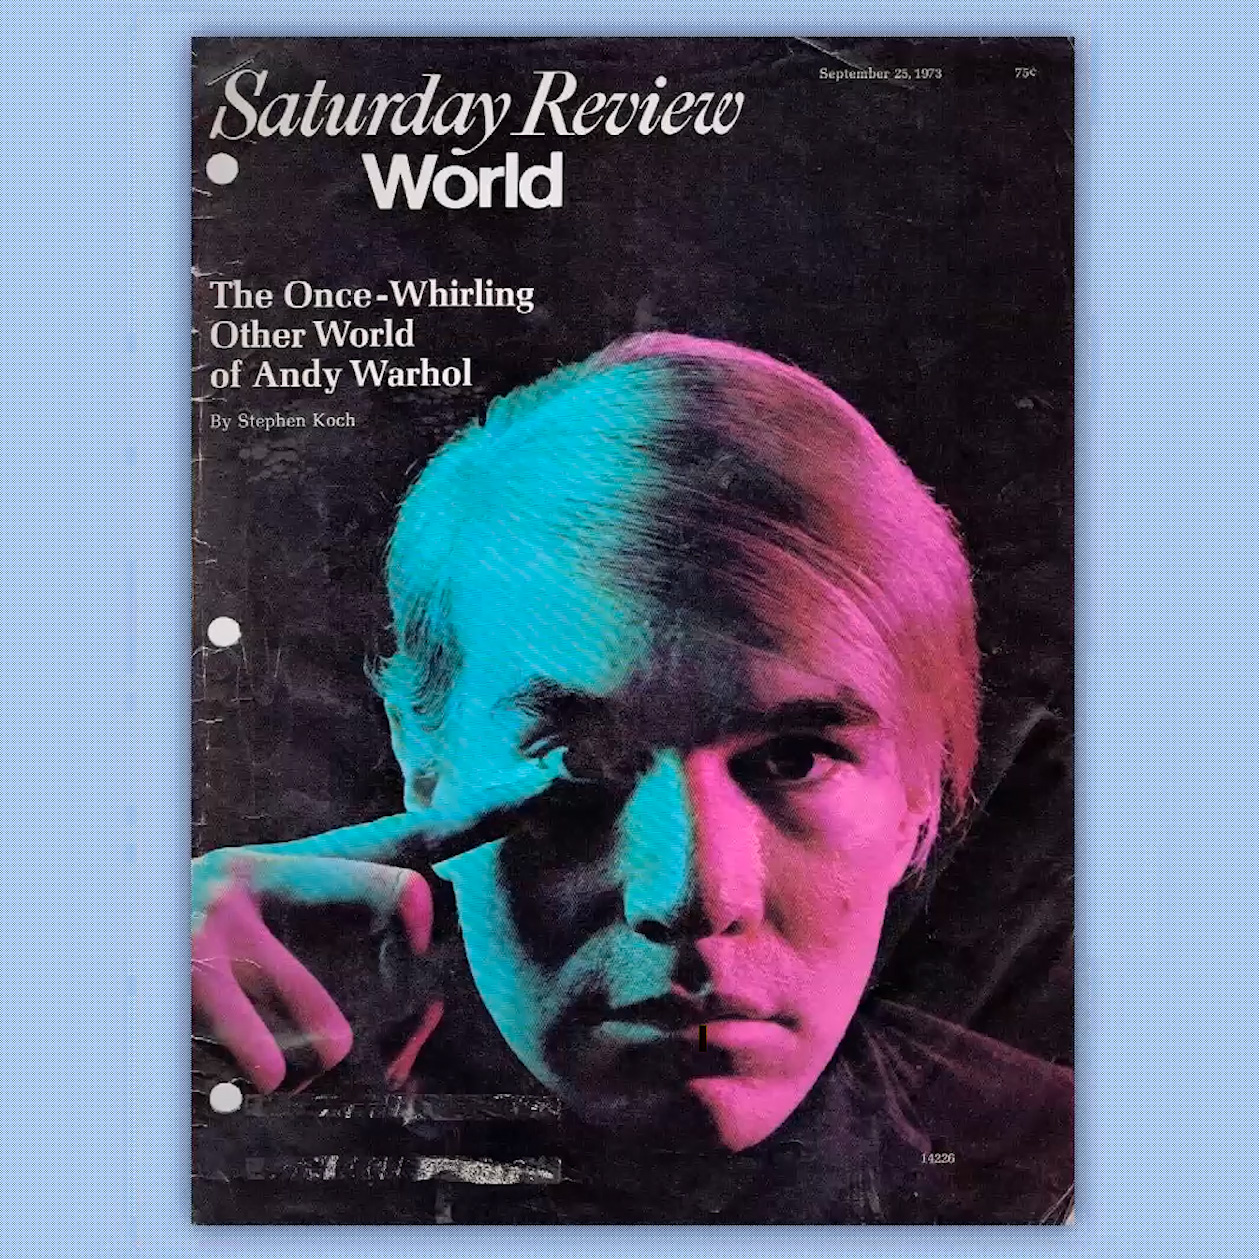 Andy Warhol on the cover of Saturday Review